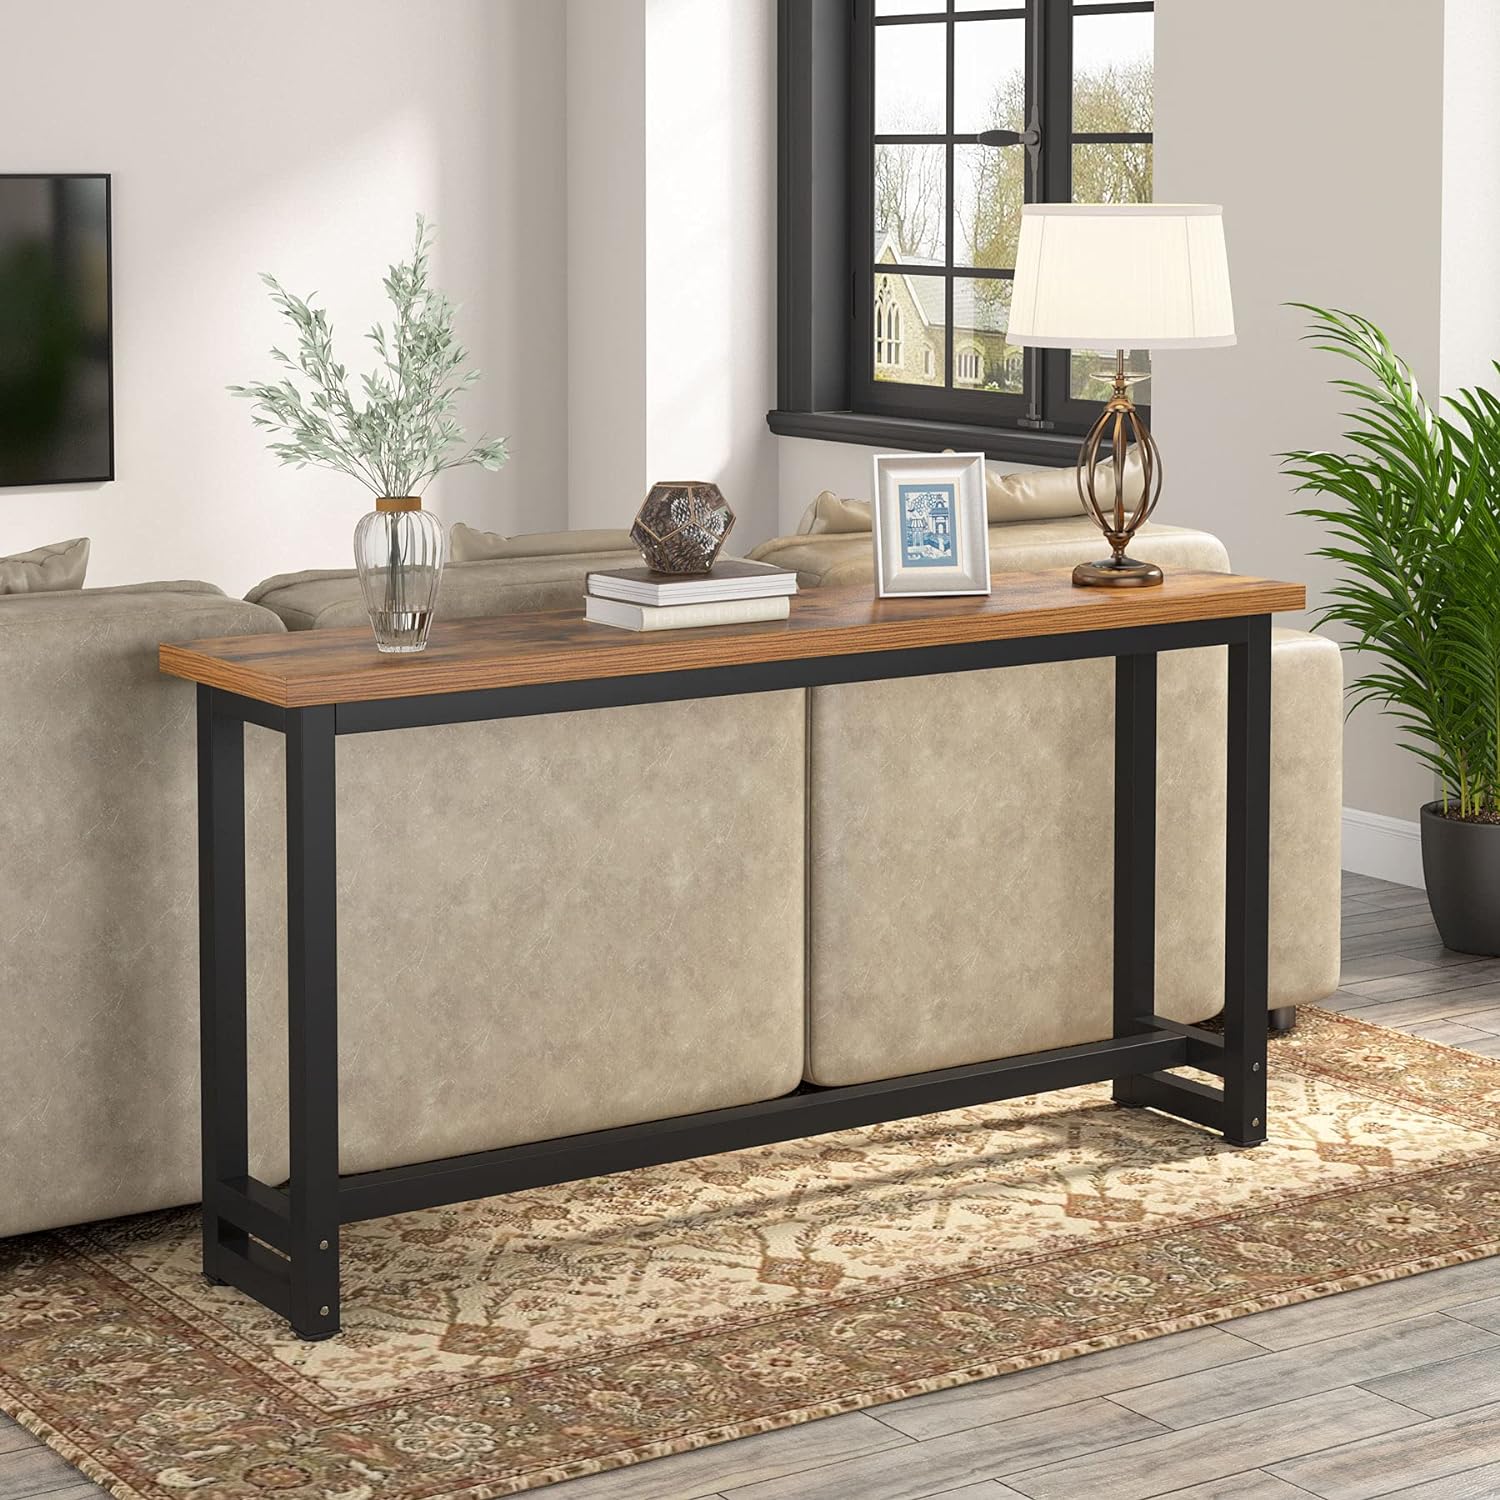 Console Table for Living Room, Meal Bench for Kitchen, Sofa End Table, Entryway and Hallway Console Table